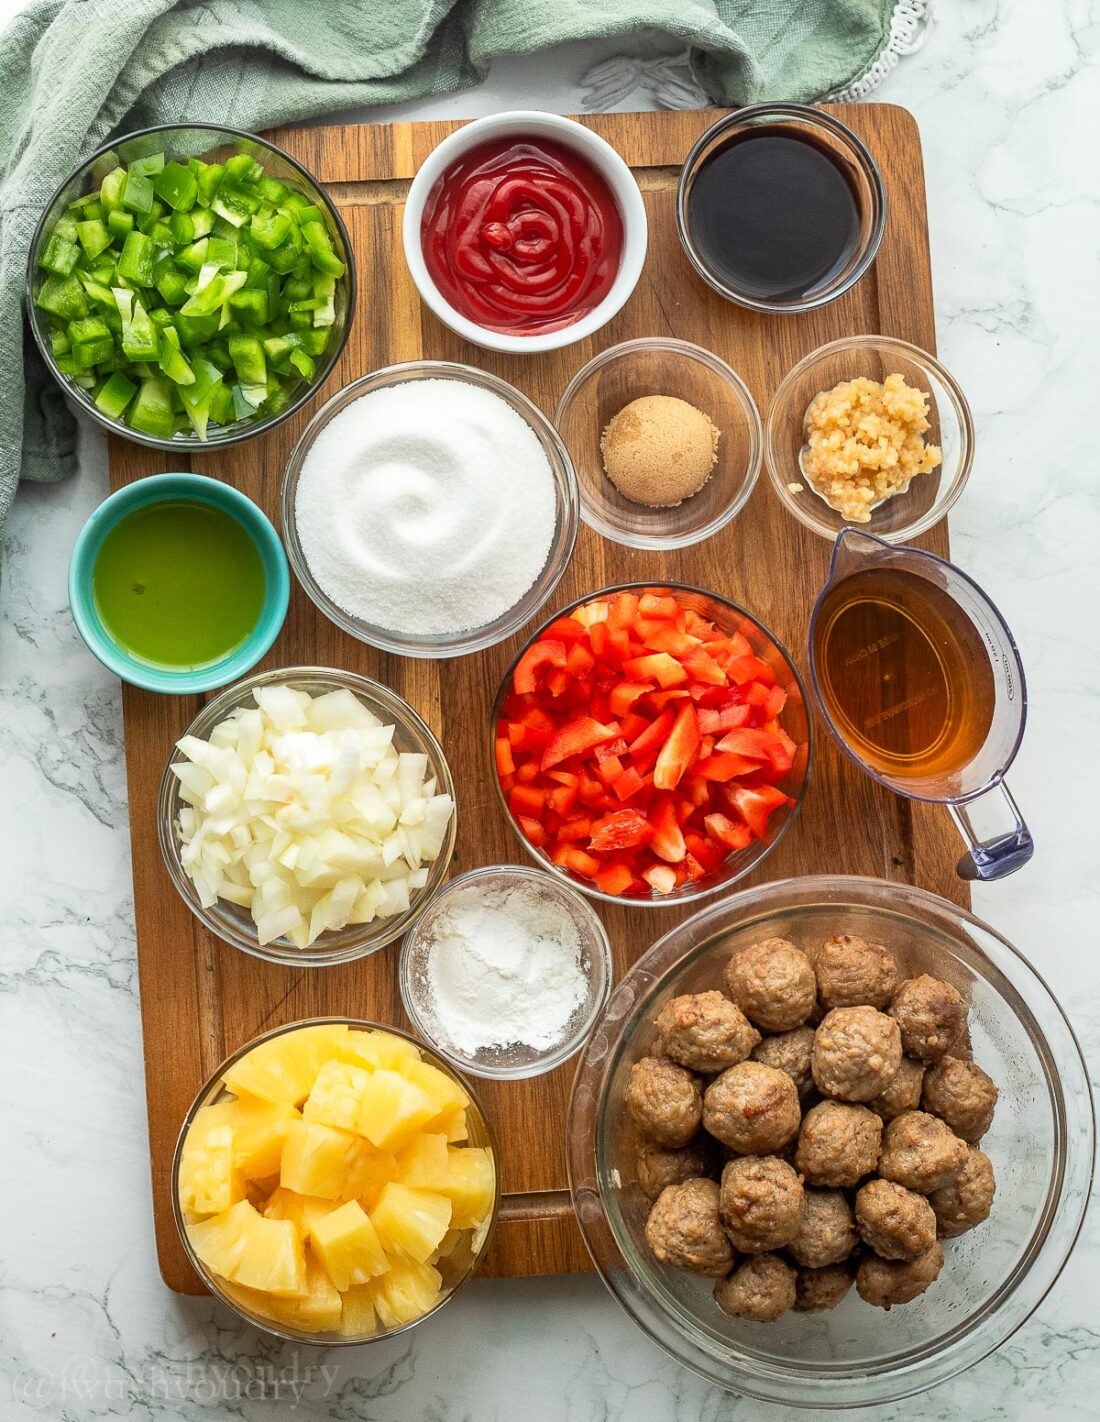 Ingredients for Sweet and sour meatballs on a wood cutting board. 